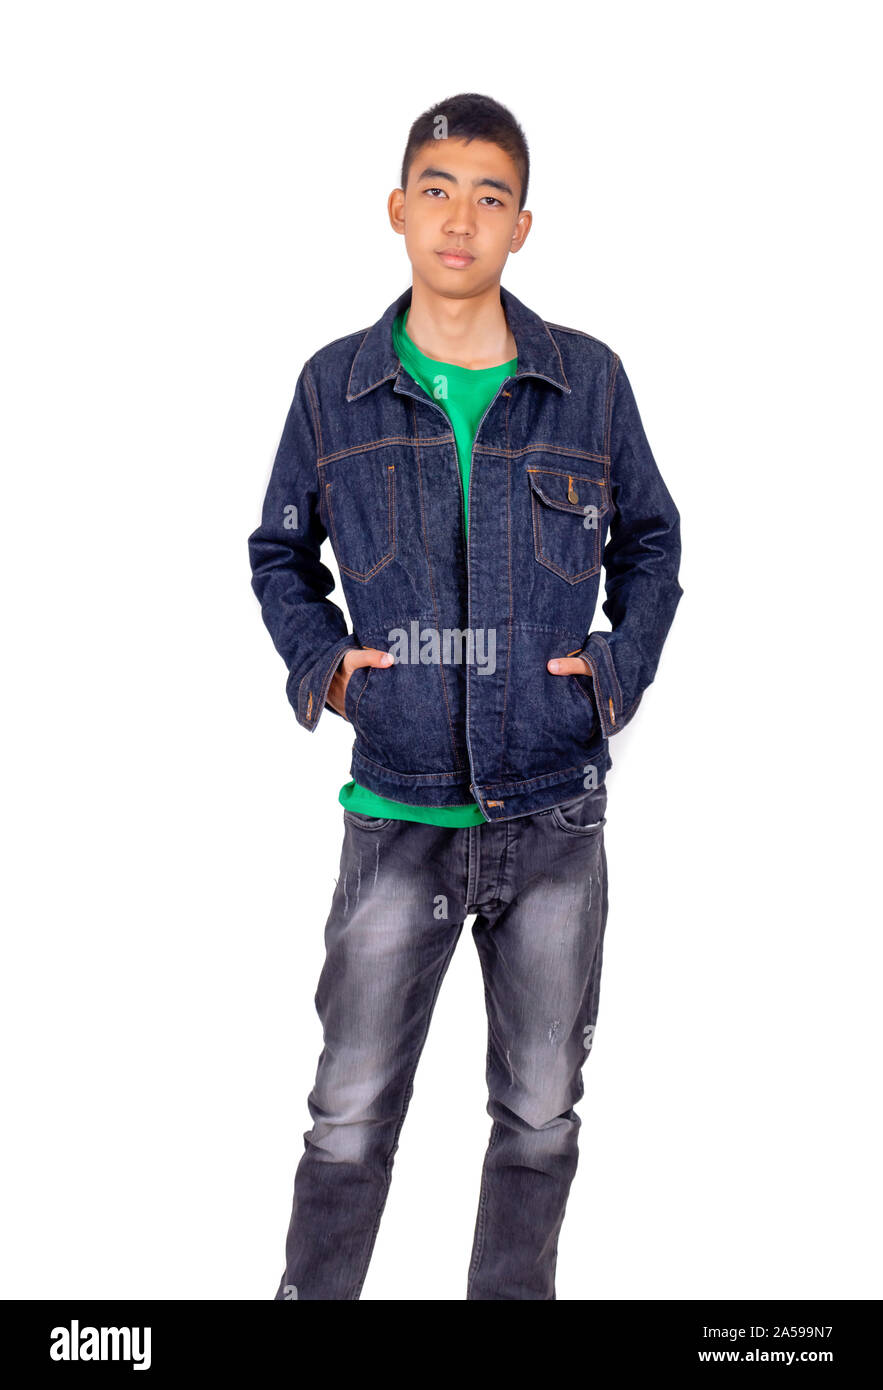 Adult Male Model Wearing Jeans High Resolution Stock Photography And Images Alamy